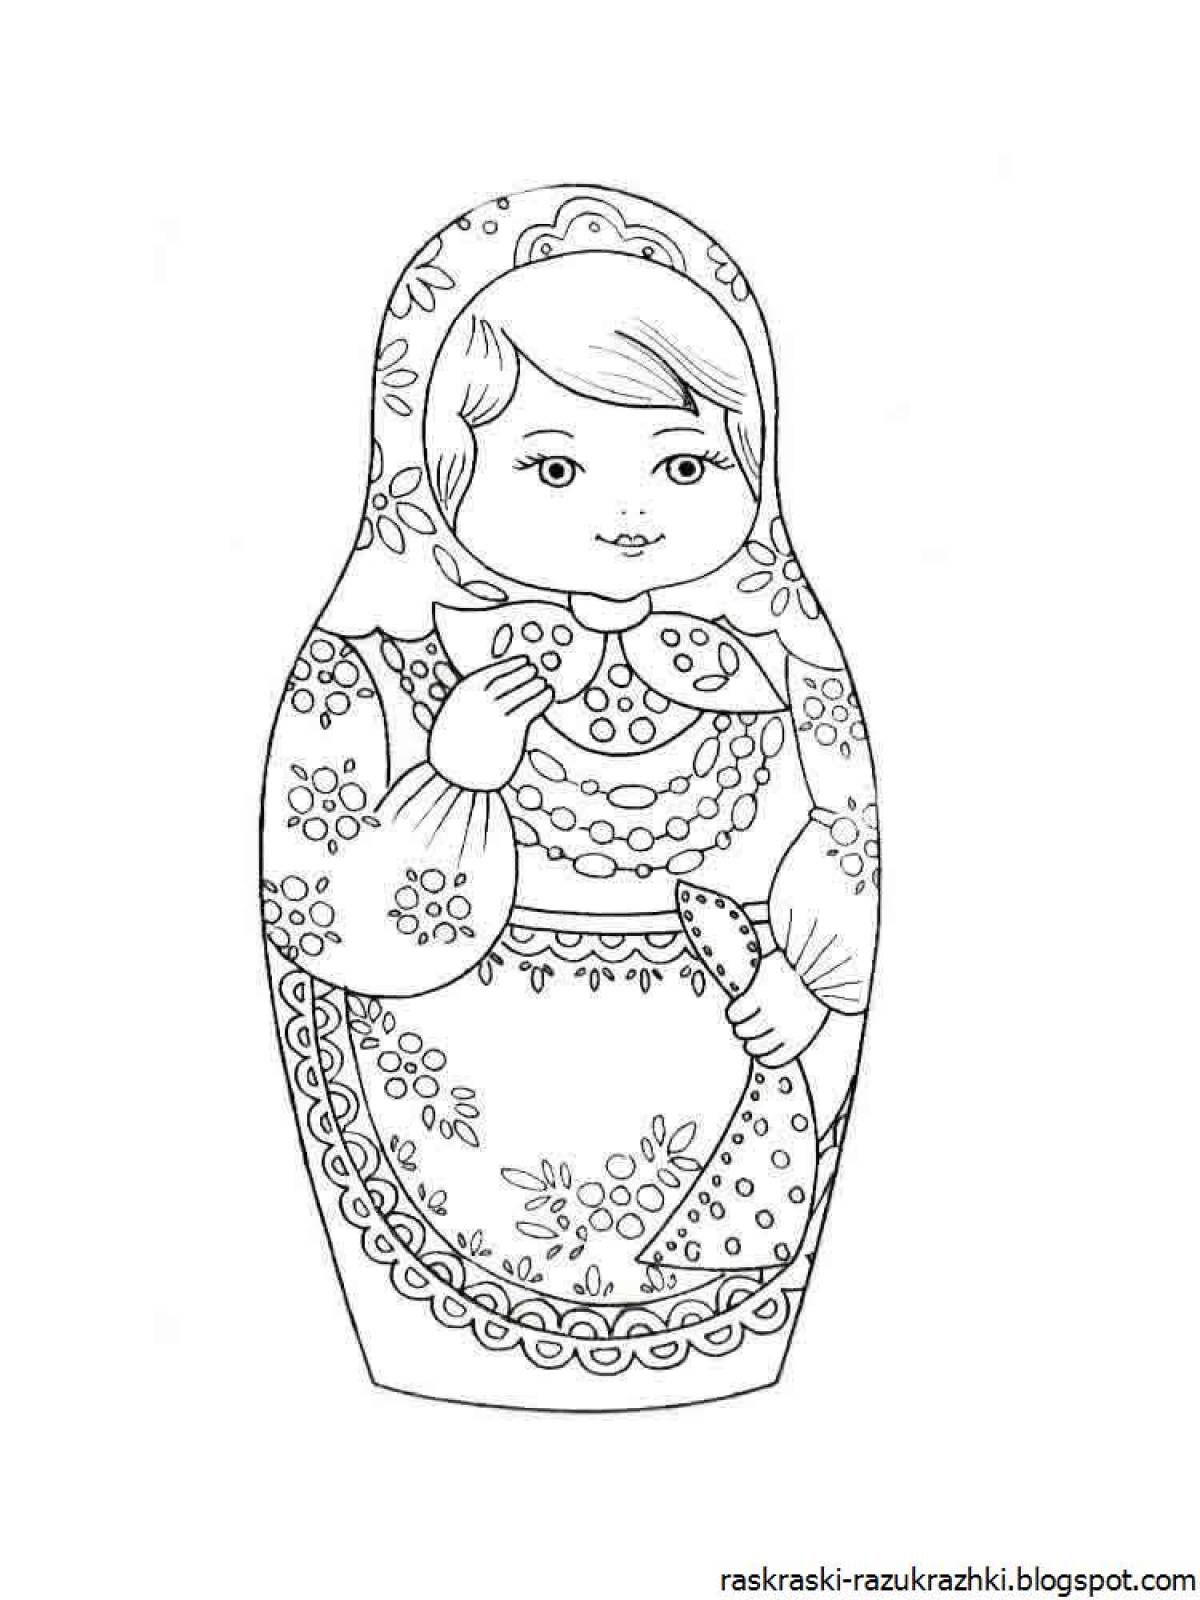 Coloring pages with multi-colored dolls for children